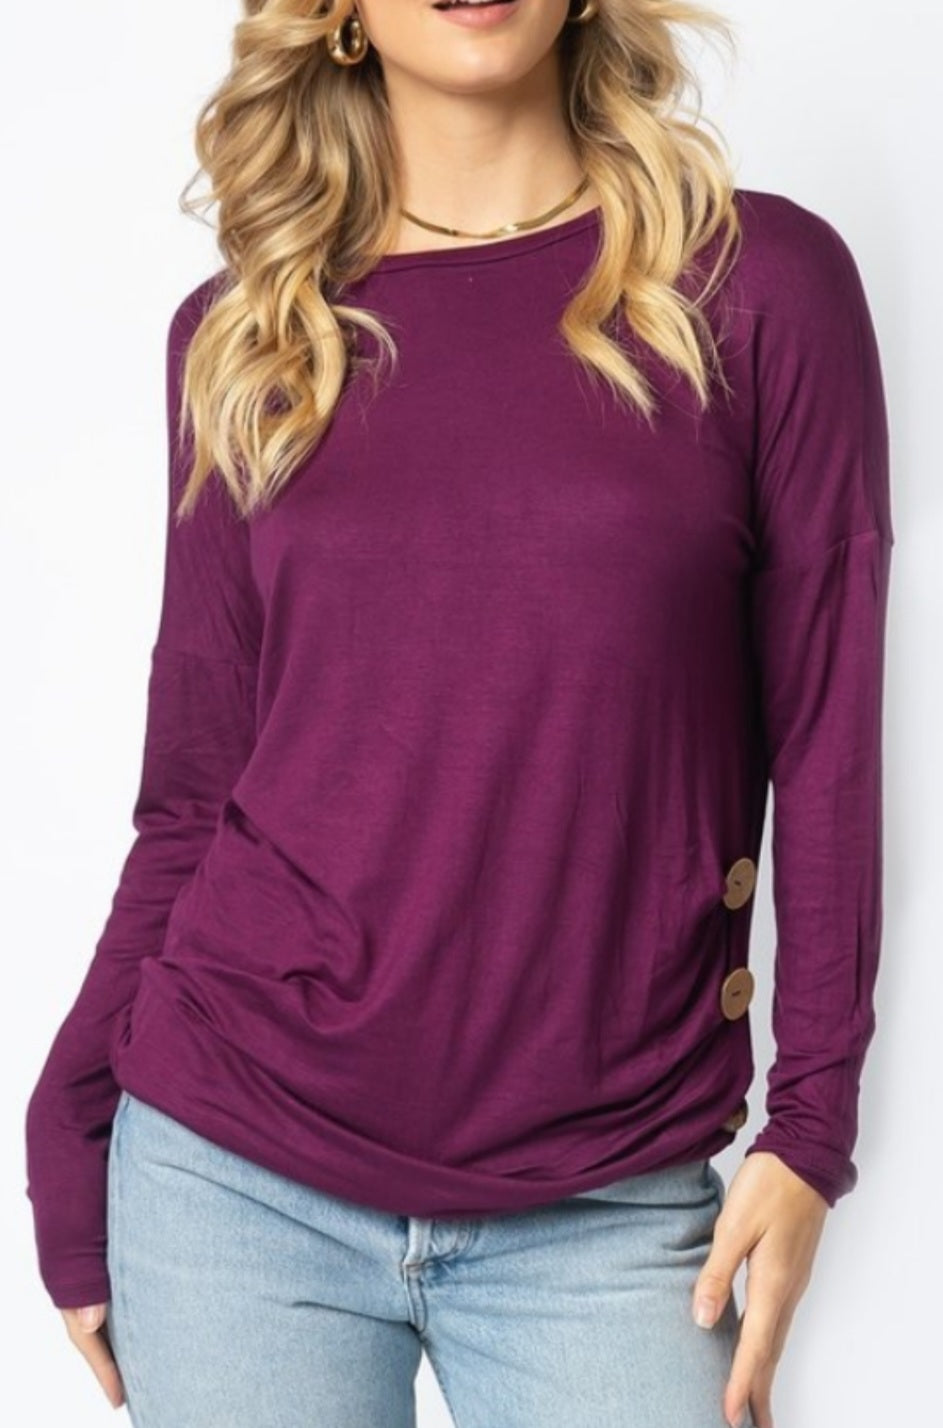 Women's Solid Long Sleeves Blouse Round Neck Top